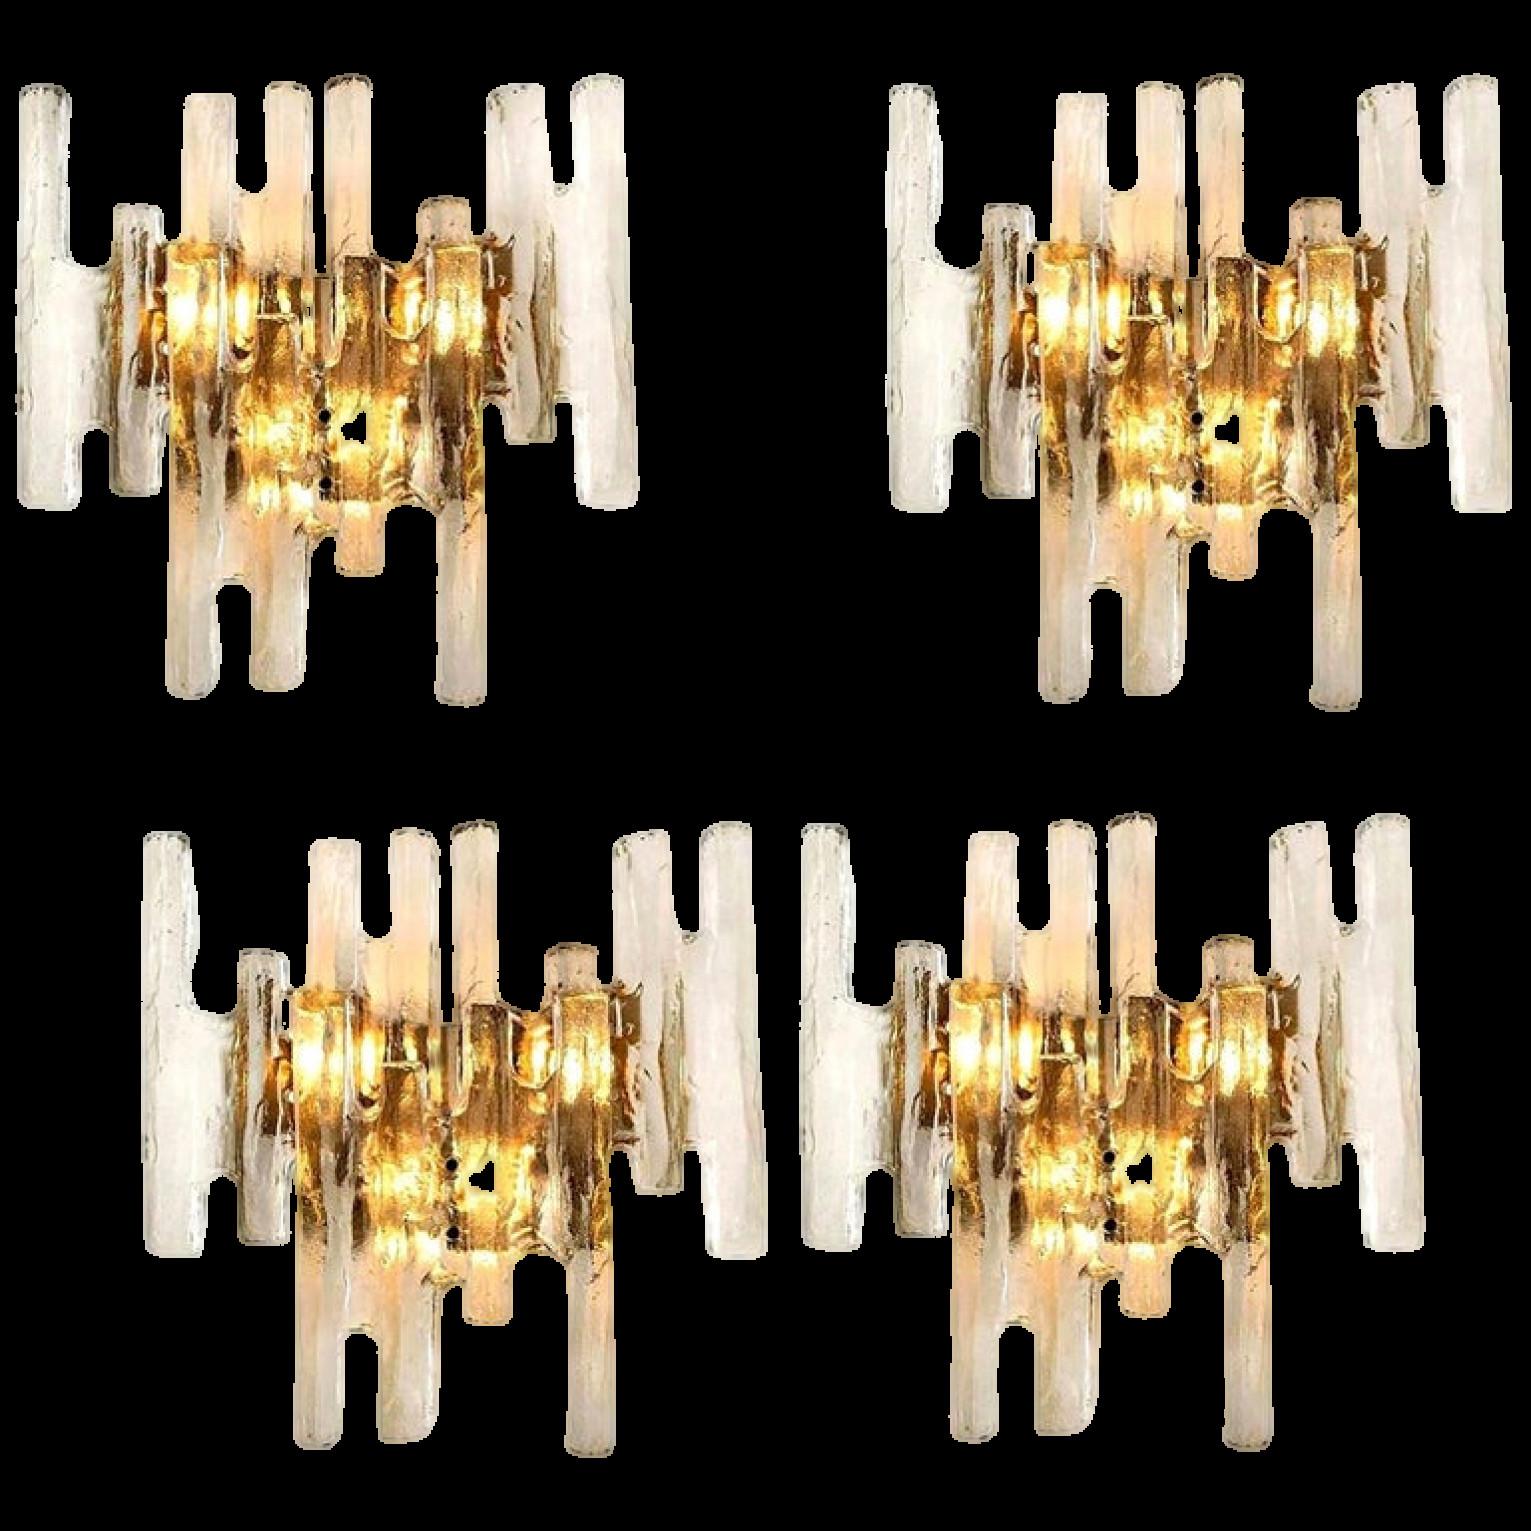 1 of the 4 elegant modern wall lights or sconces, manufactured by J.T. Kalmar Austria in the 1970s. Lovely design, executed to a very high standard. Each wall light as solid ice glass sheets dangling on it.

Clean lines to complement all decors. The